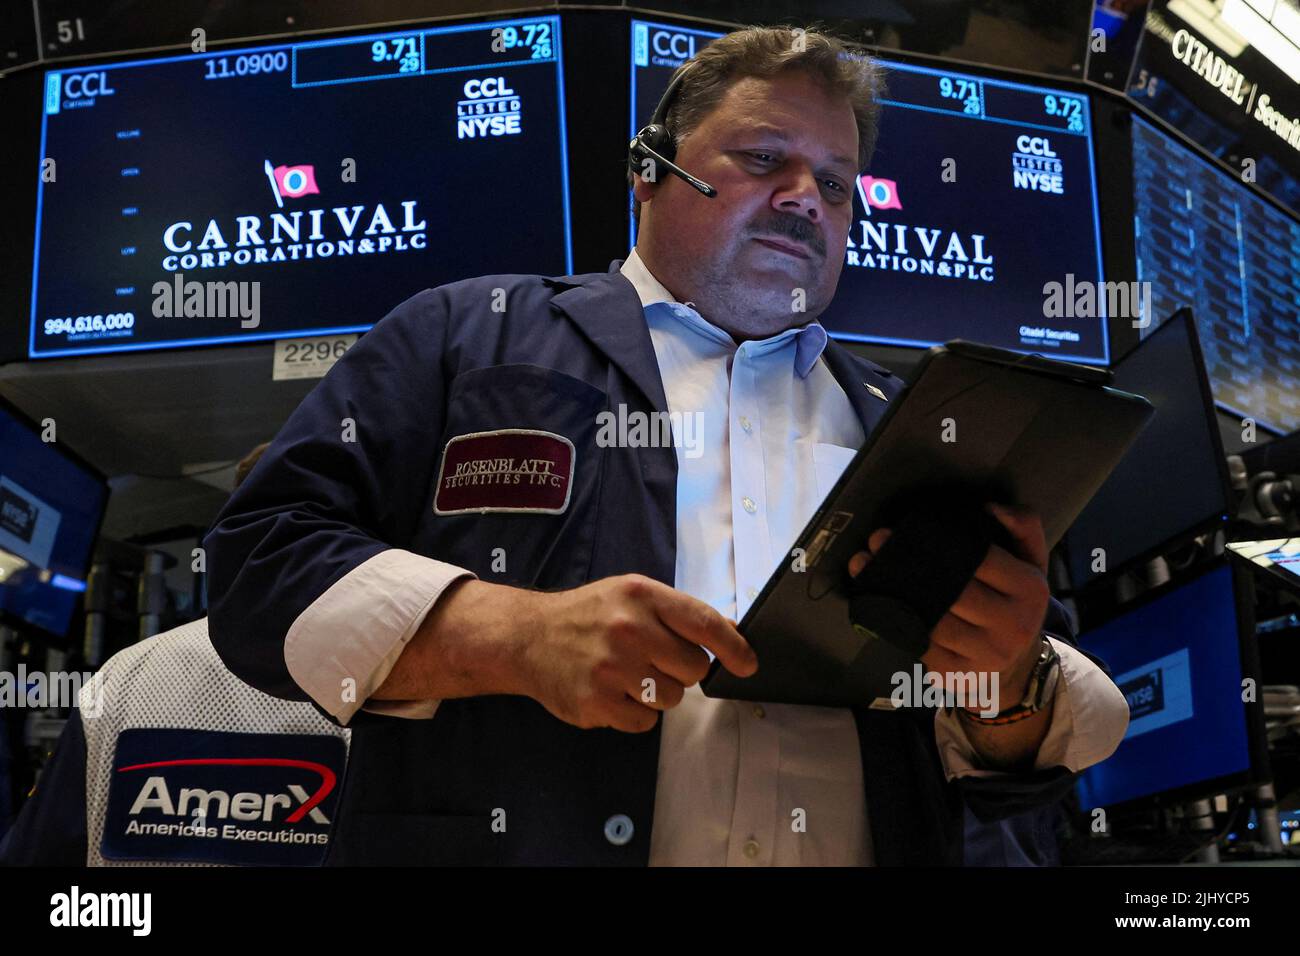 A trader works at the post where Carnival Corporation is traded on the floor of the New York Stock Exchange (NYSE) in New York City, U.S., July 21, 2022.  REUTERS/Brendan McDermid Stock Photo